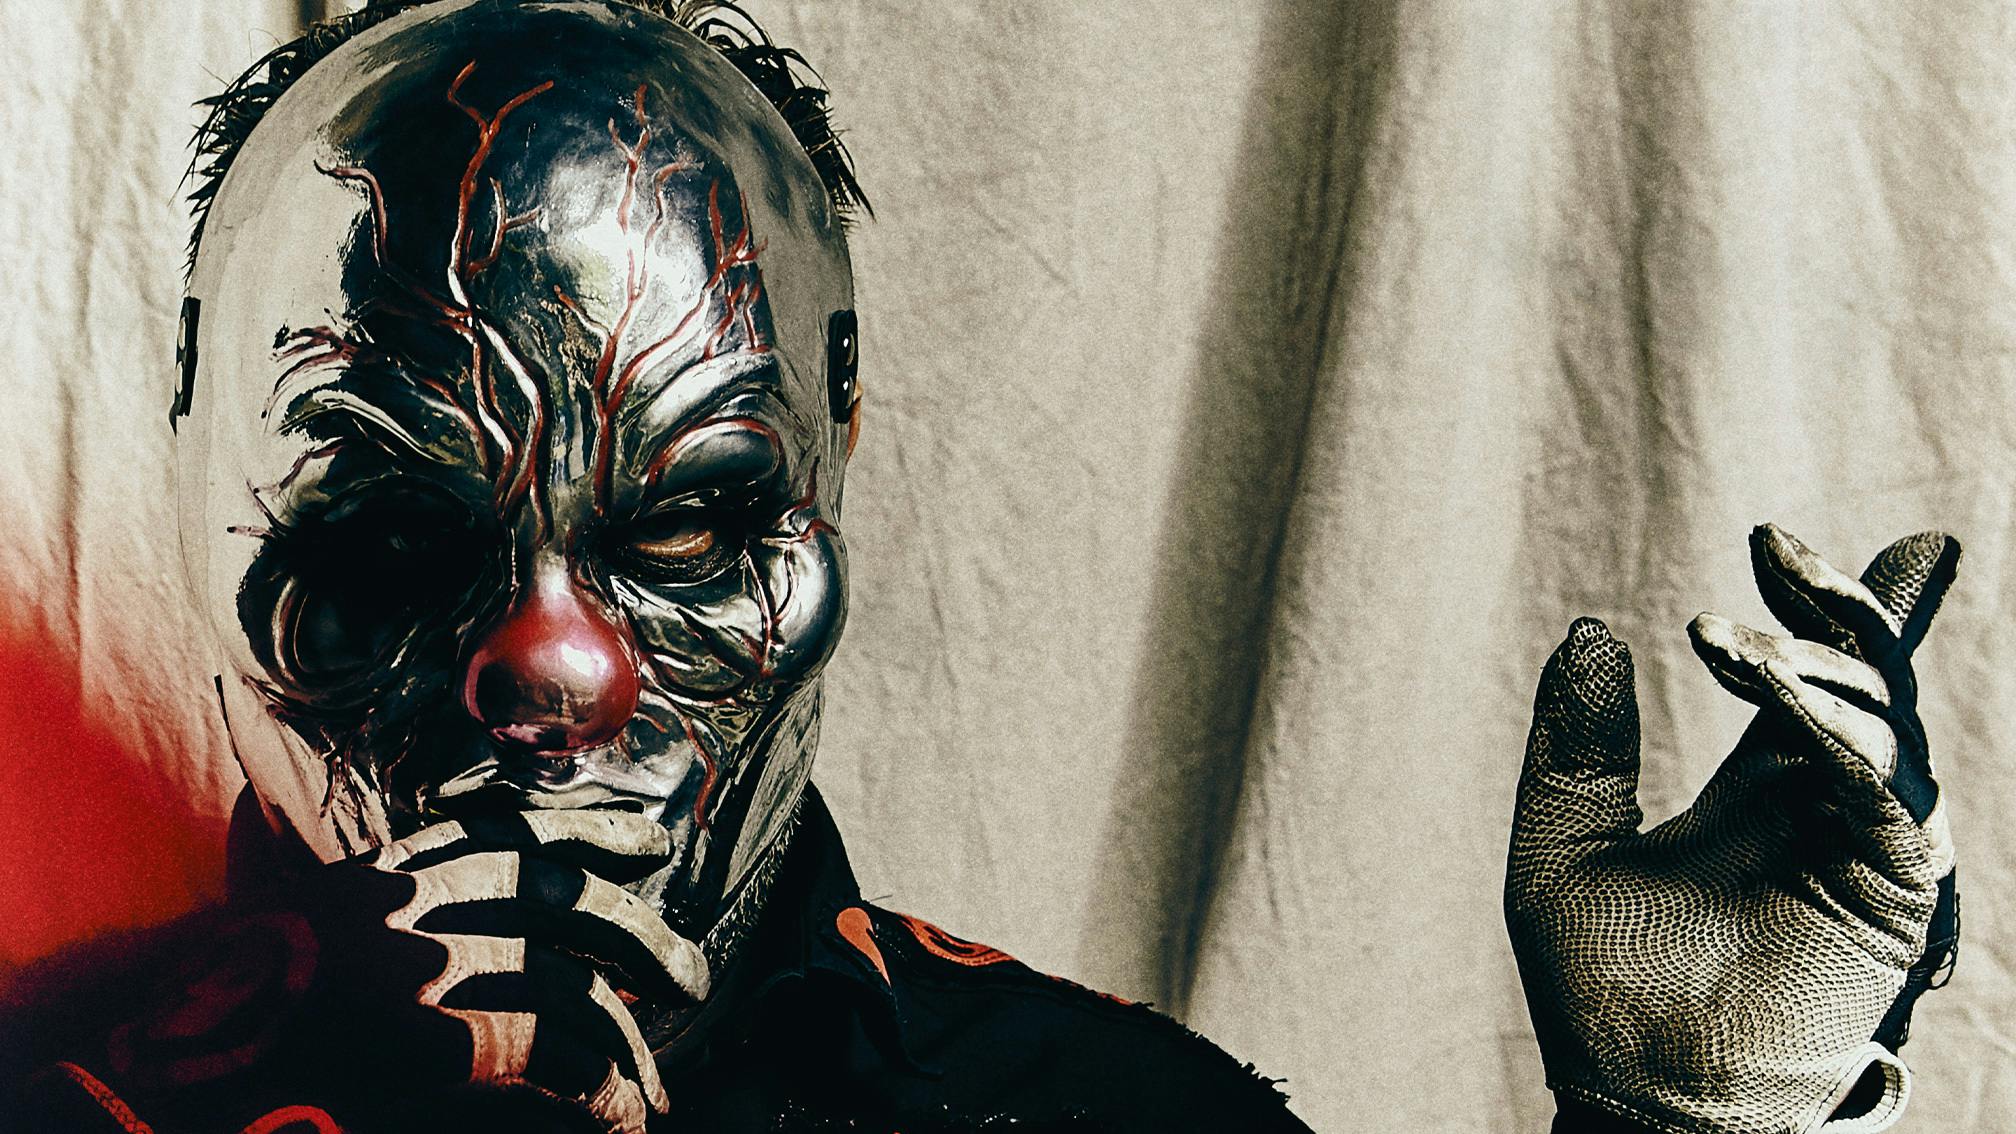 “Slipknot now is about being true to ourselves, and we know what we want”: Clown on celebrating the debut record and potential surprise shows